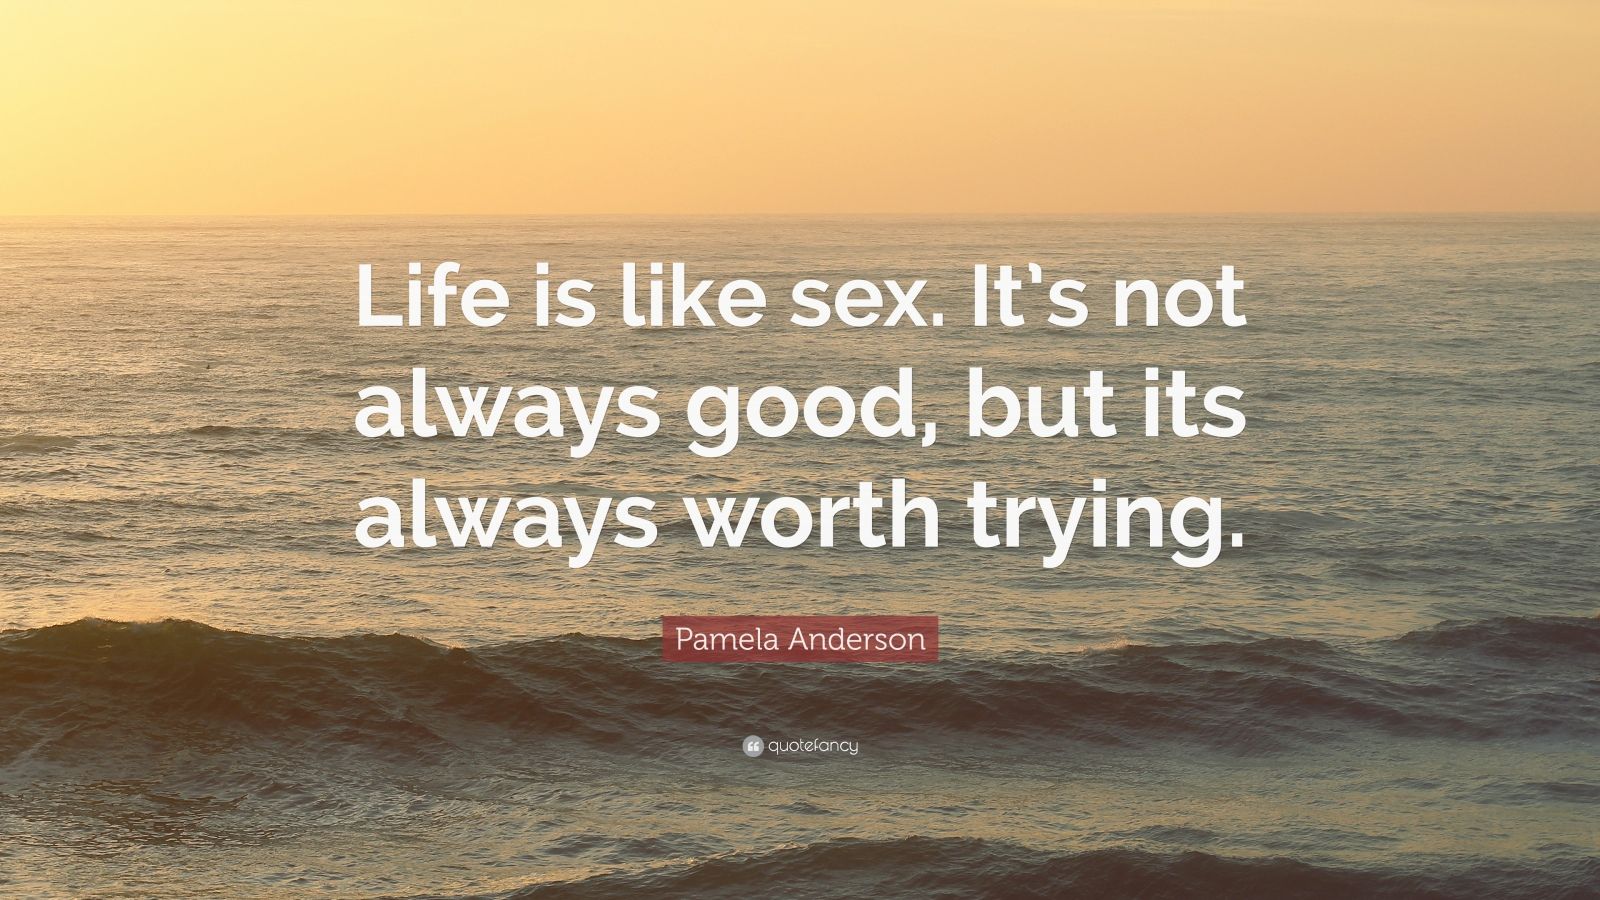 Pamela Anderson Quote “life Is Like Sex Its Not Always Good But Its Always Worth Trying” 9 3163